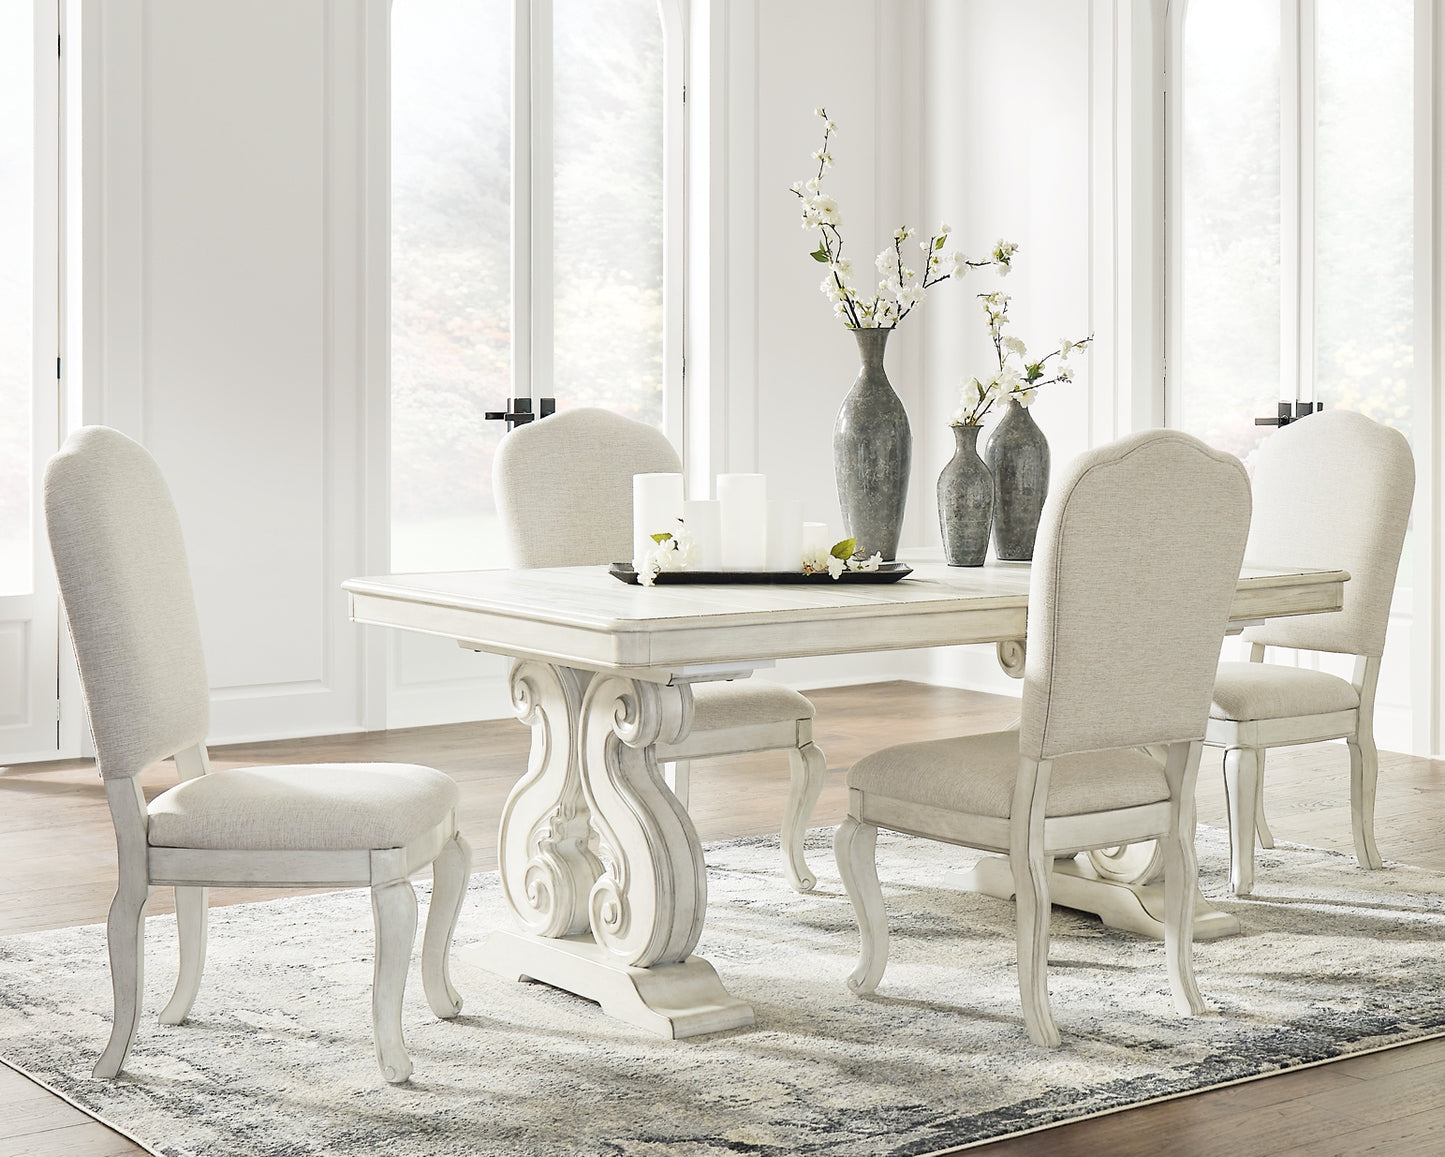 Arlendyne Dining Table and 4 Chairs Wilson Furniture (OH)  in Bridgeport, Ohio. Serving Bridgeport, Yorkville, Bellaire, & Avondale